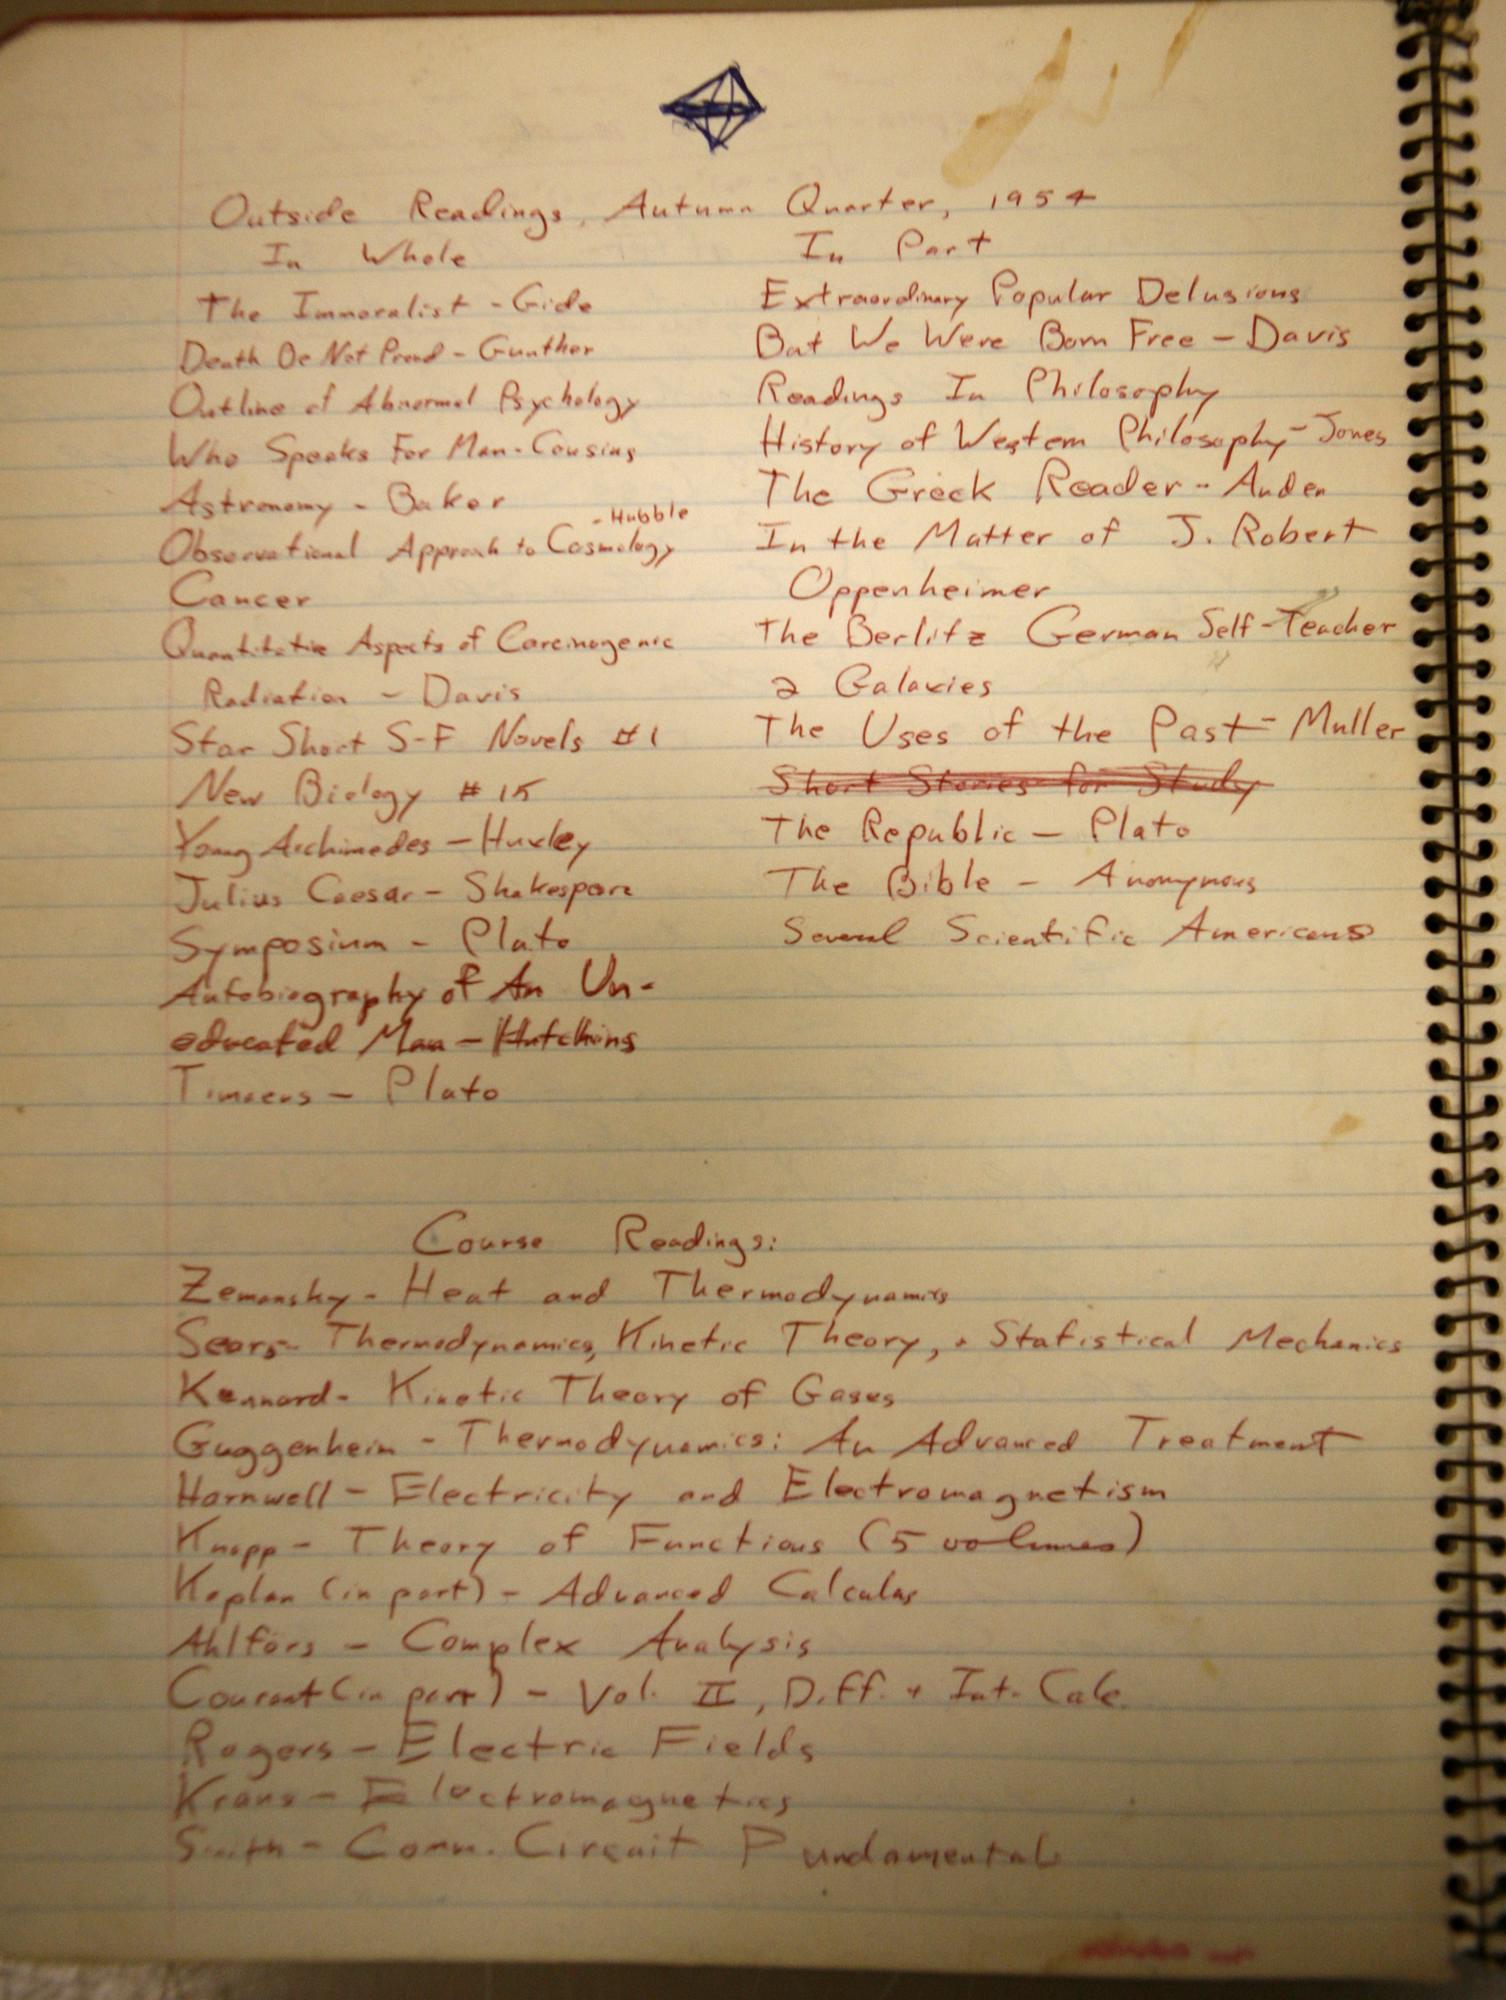 List of titles that Carl Sagan planned to read during one of his semesters at the University of Chicago. Library of Congress Manuscript Division